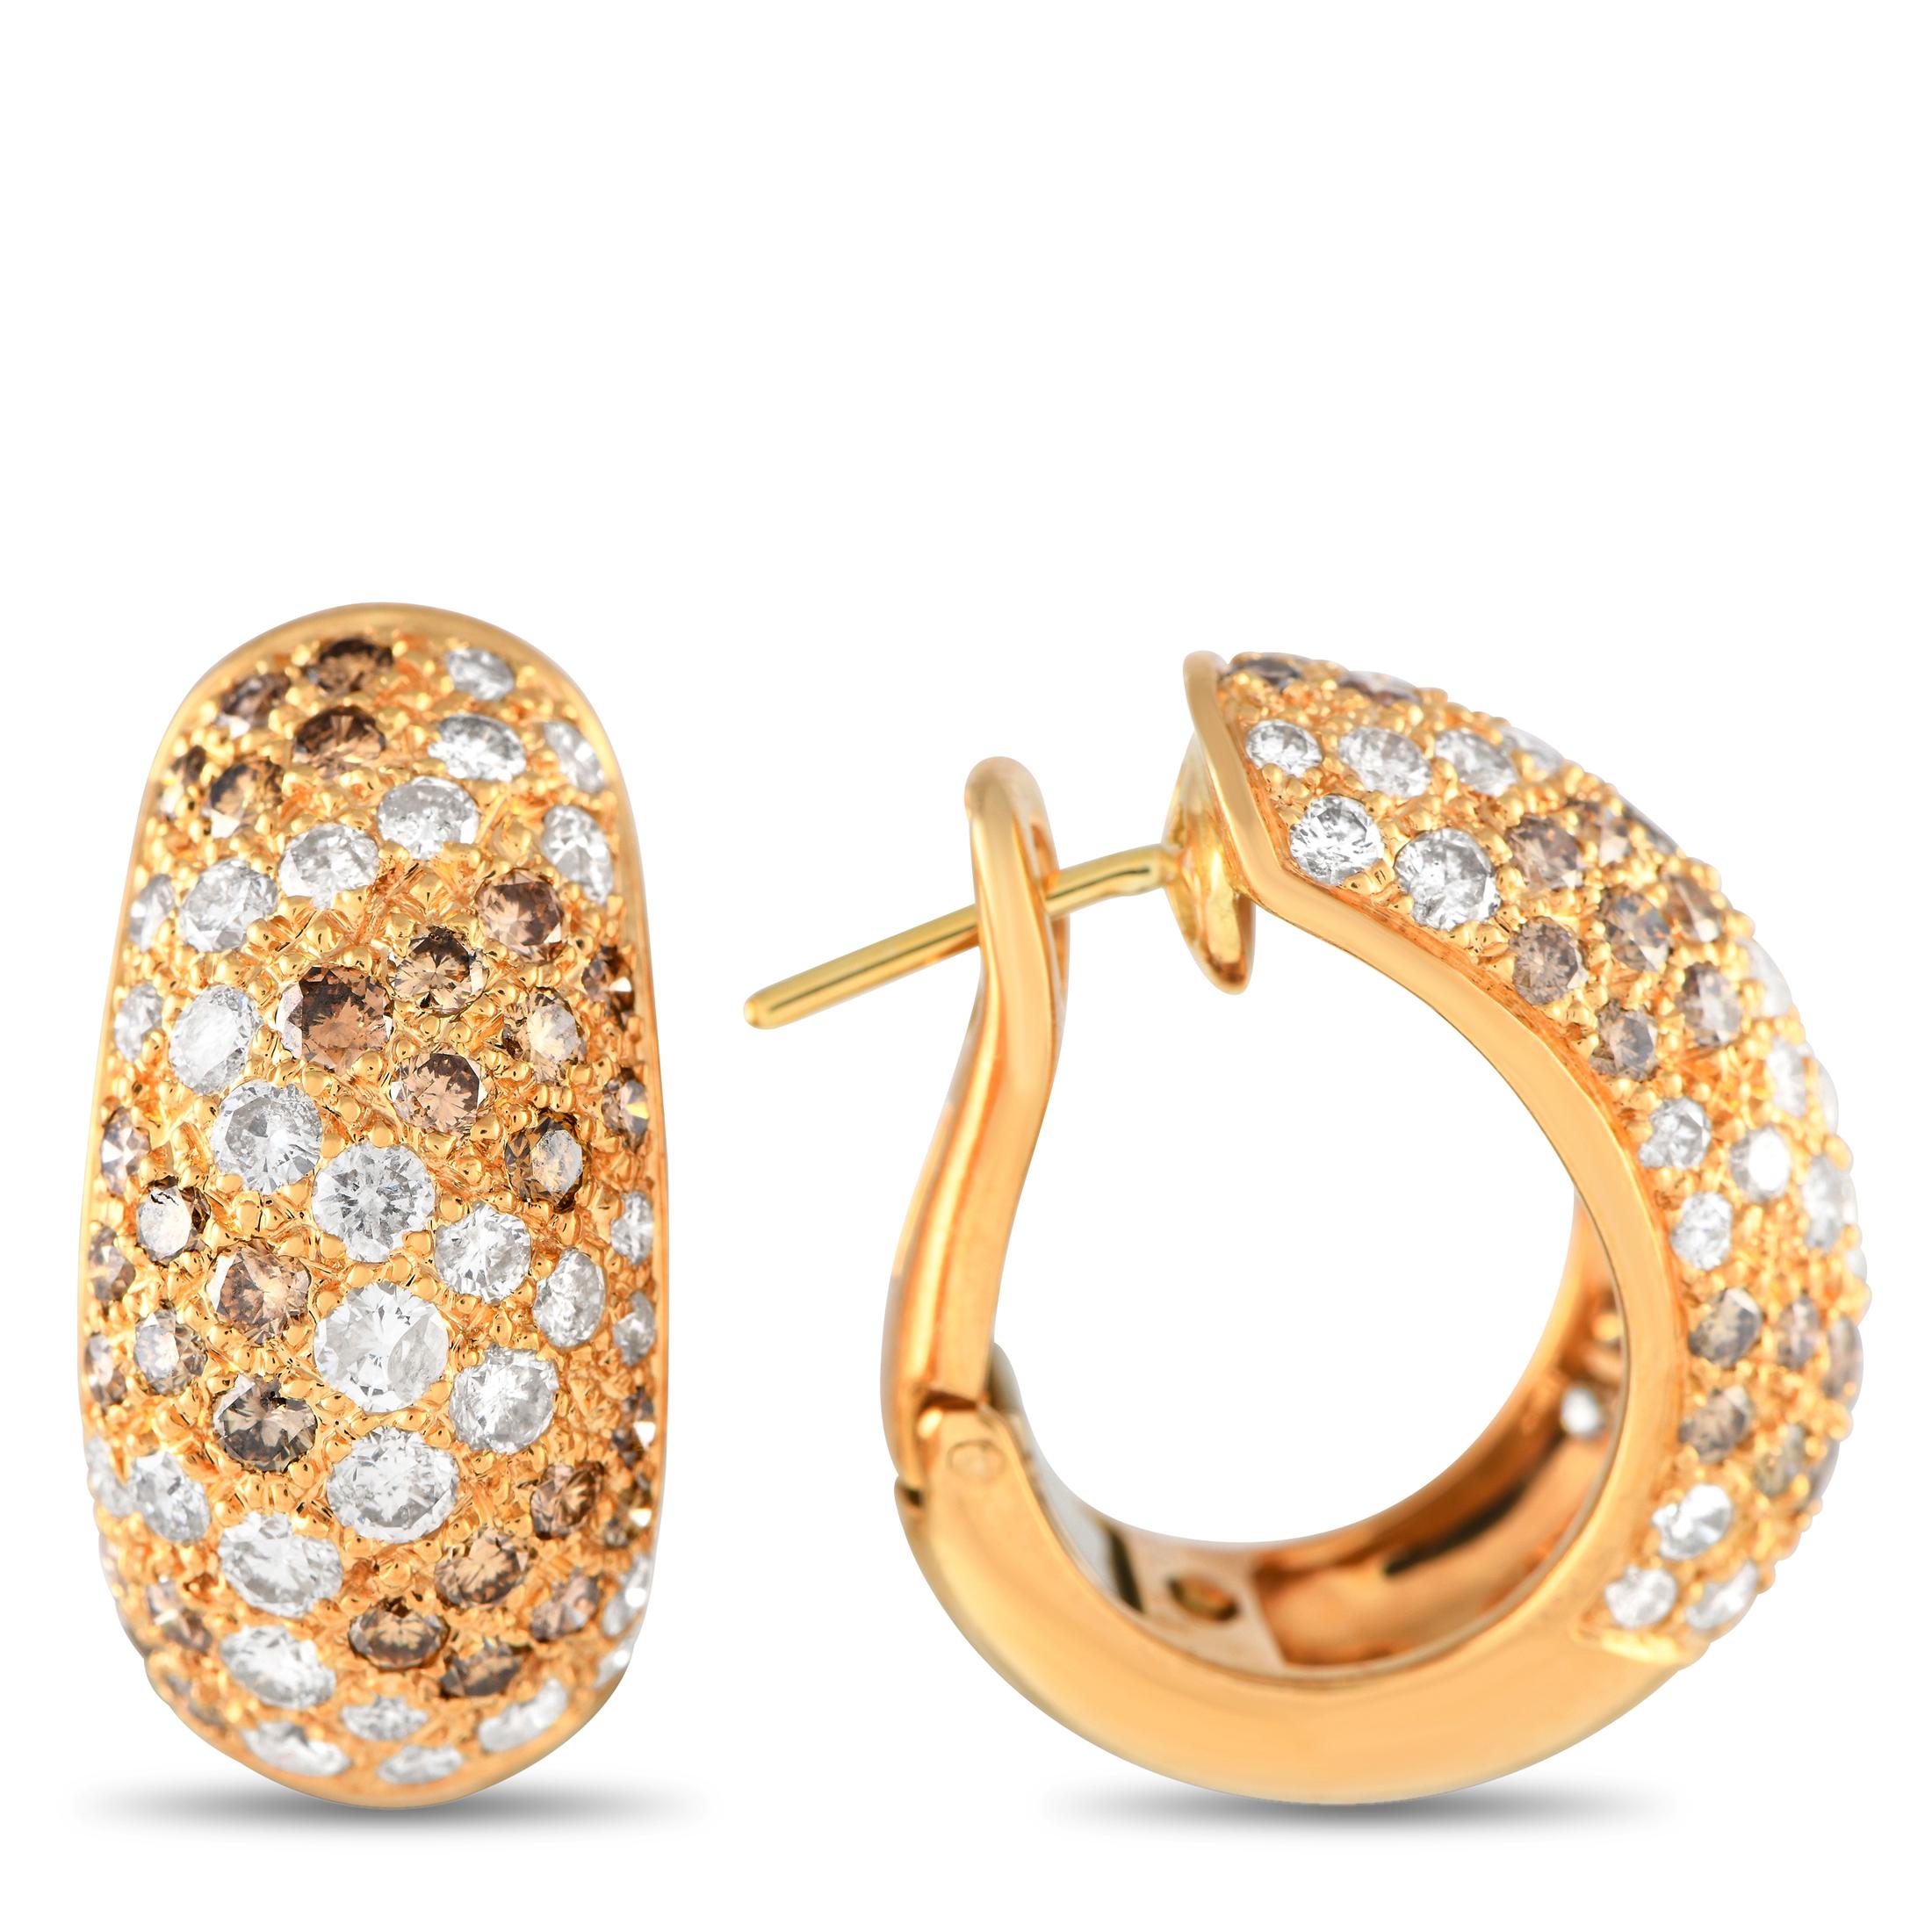 Multicolored Diamonds add texture, dimension, and visual impact to these impressive Cartier Sauvage earrings. The sophisticated 18K Yellow Gold setting measures 0.85 long, 0.75 wide, and features a delicately curved design.This jewelry piece is